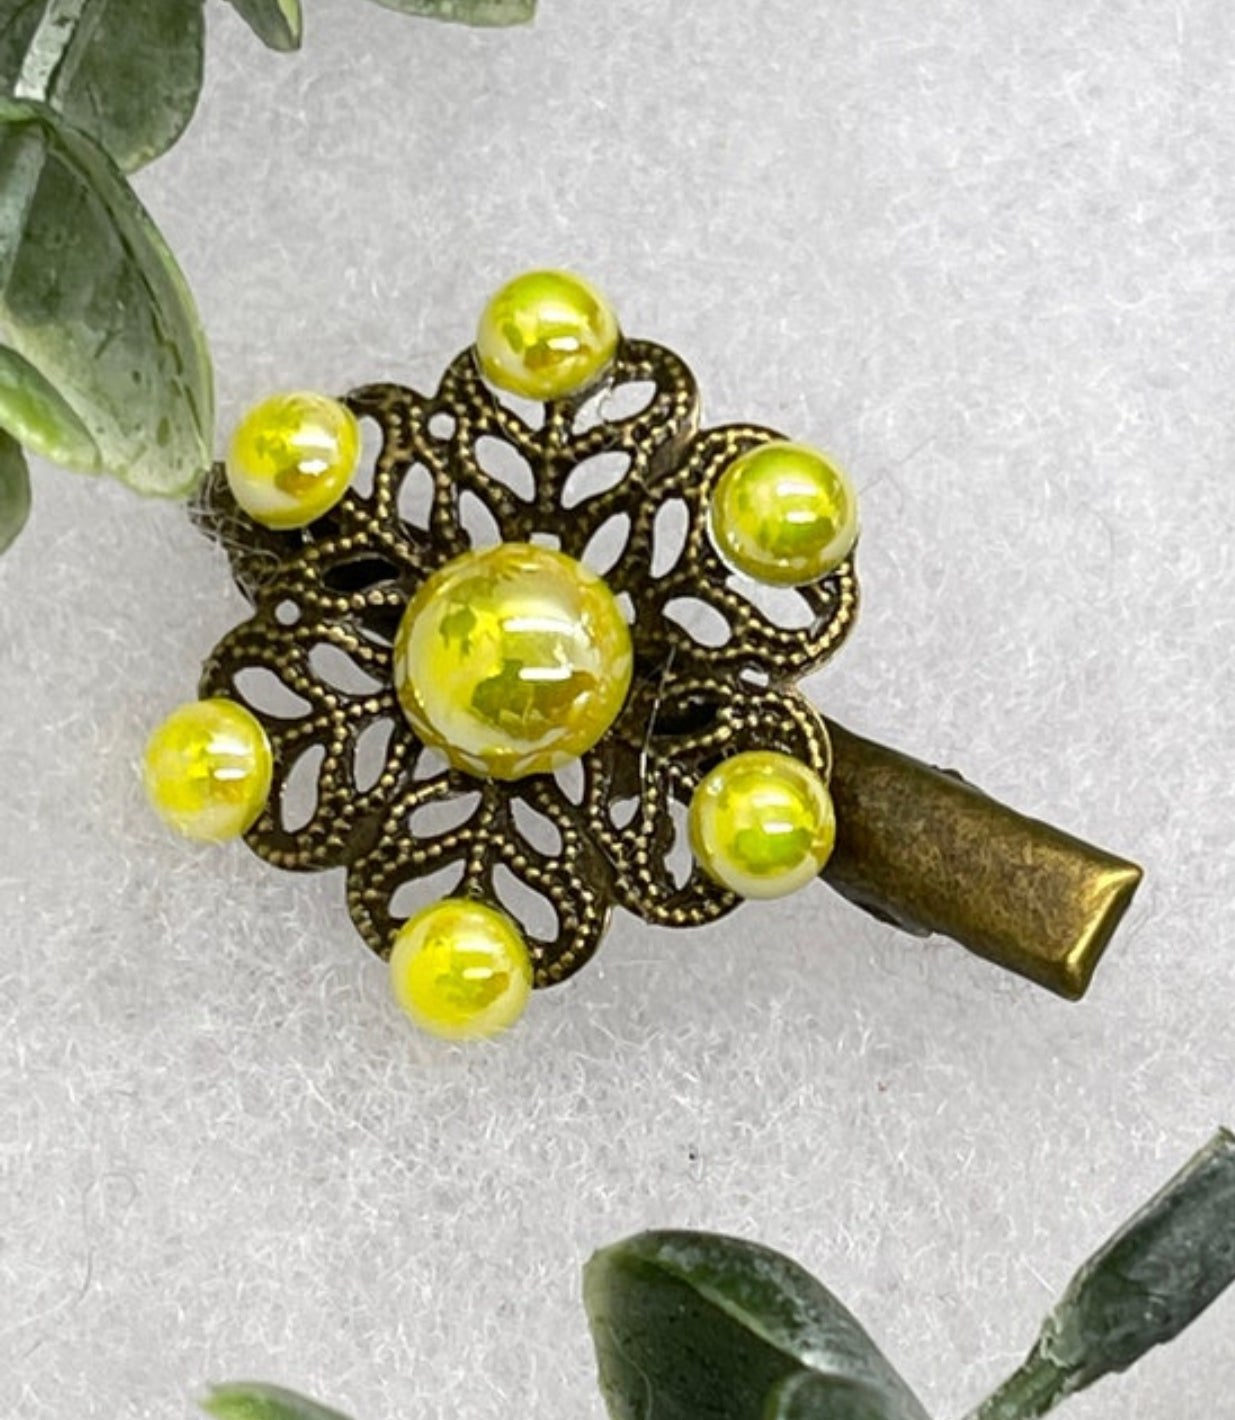 Yellow Flower vintage antique style alligator clip approximately 2.0” long hair accessory bridal wedding Retro